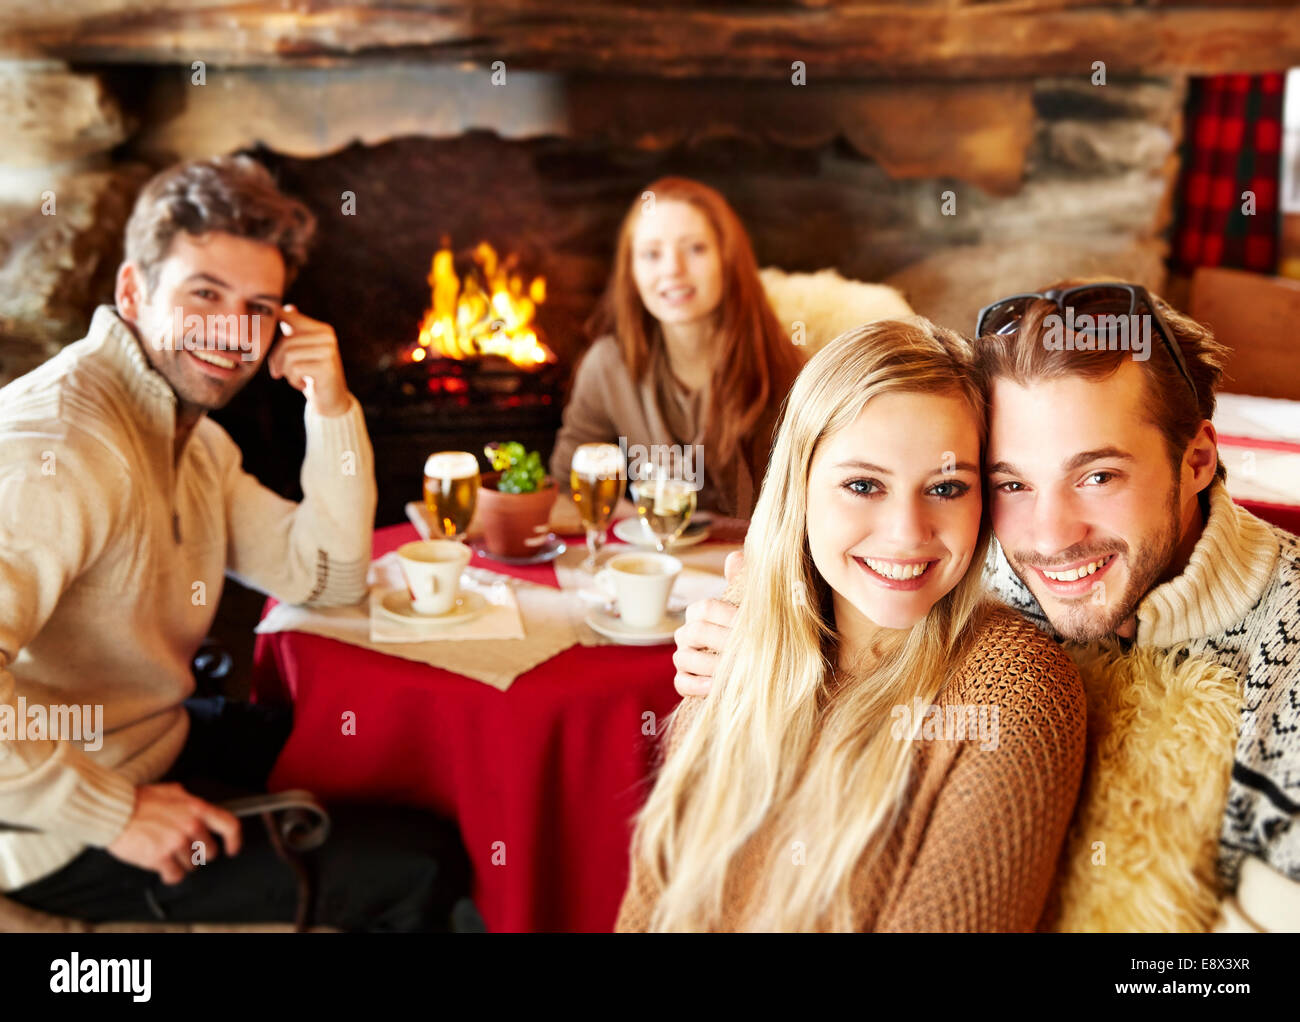 Friends eating together by fireplace Stock Photo